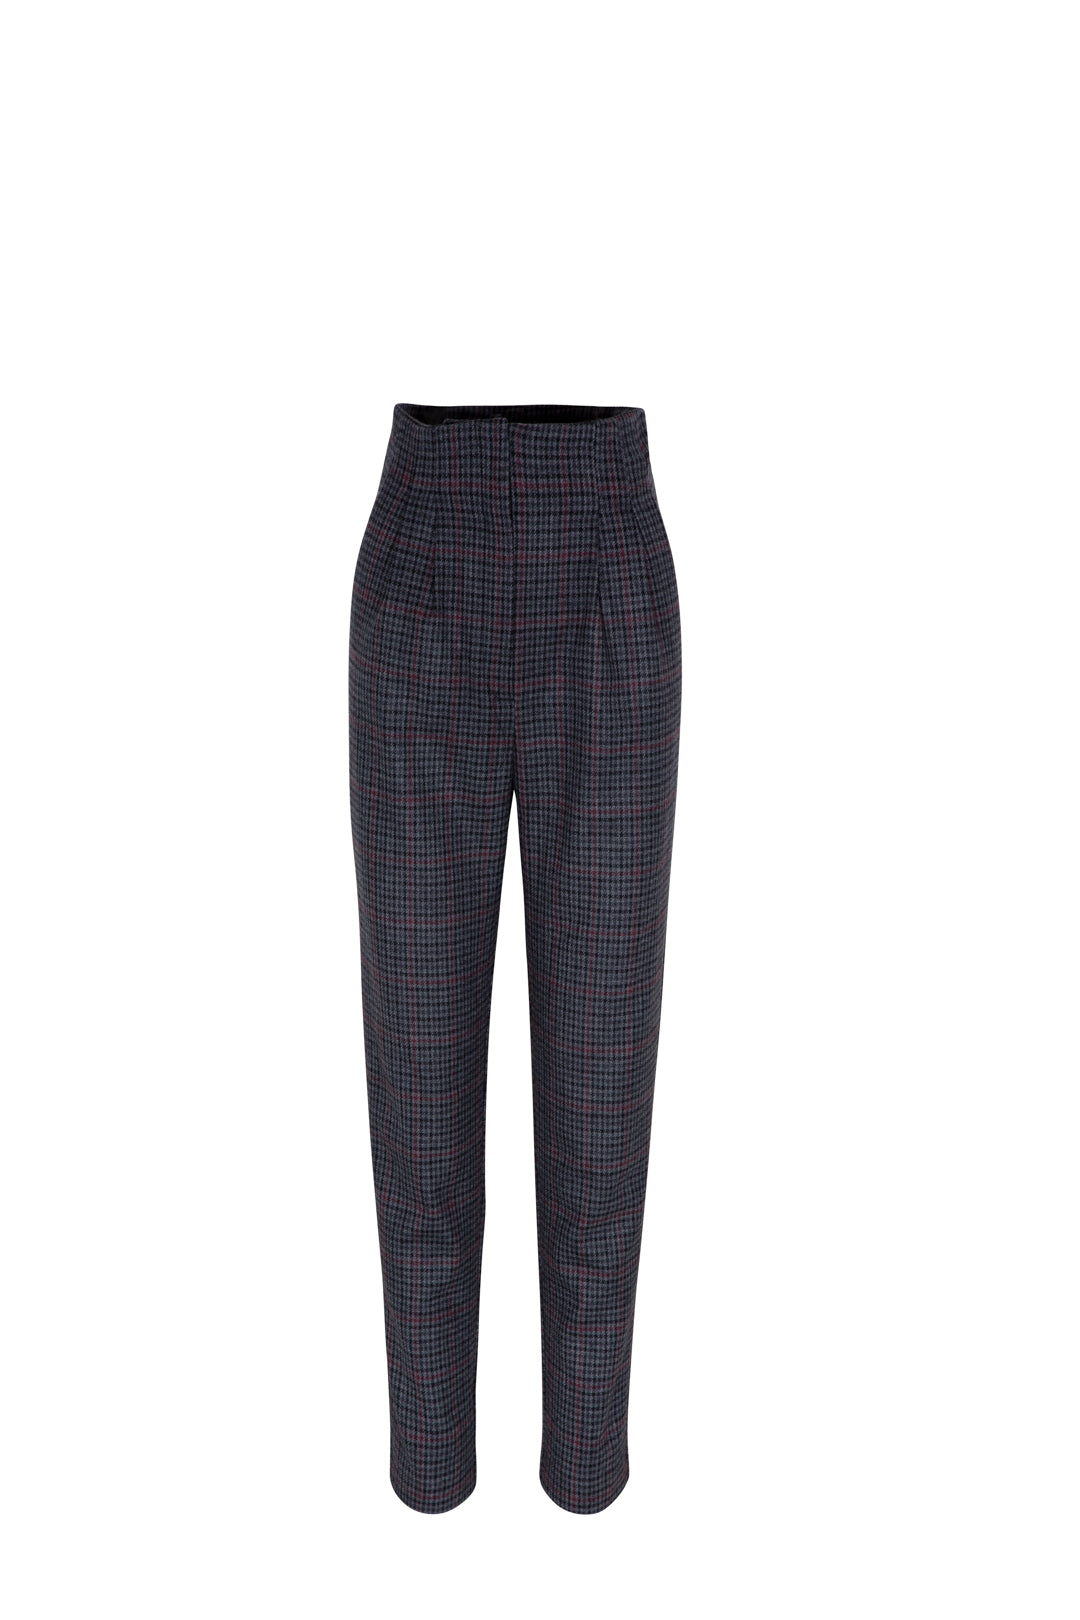 GRAY AND LARGE CHECK STOCKHOLM TROUSERS